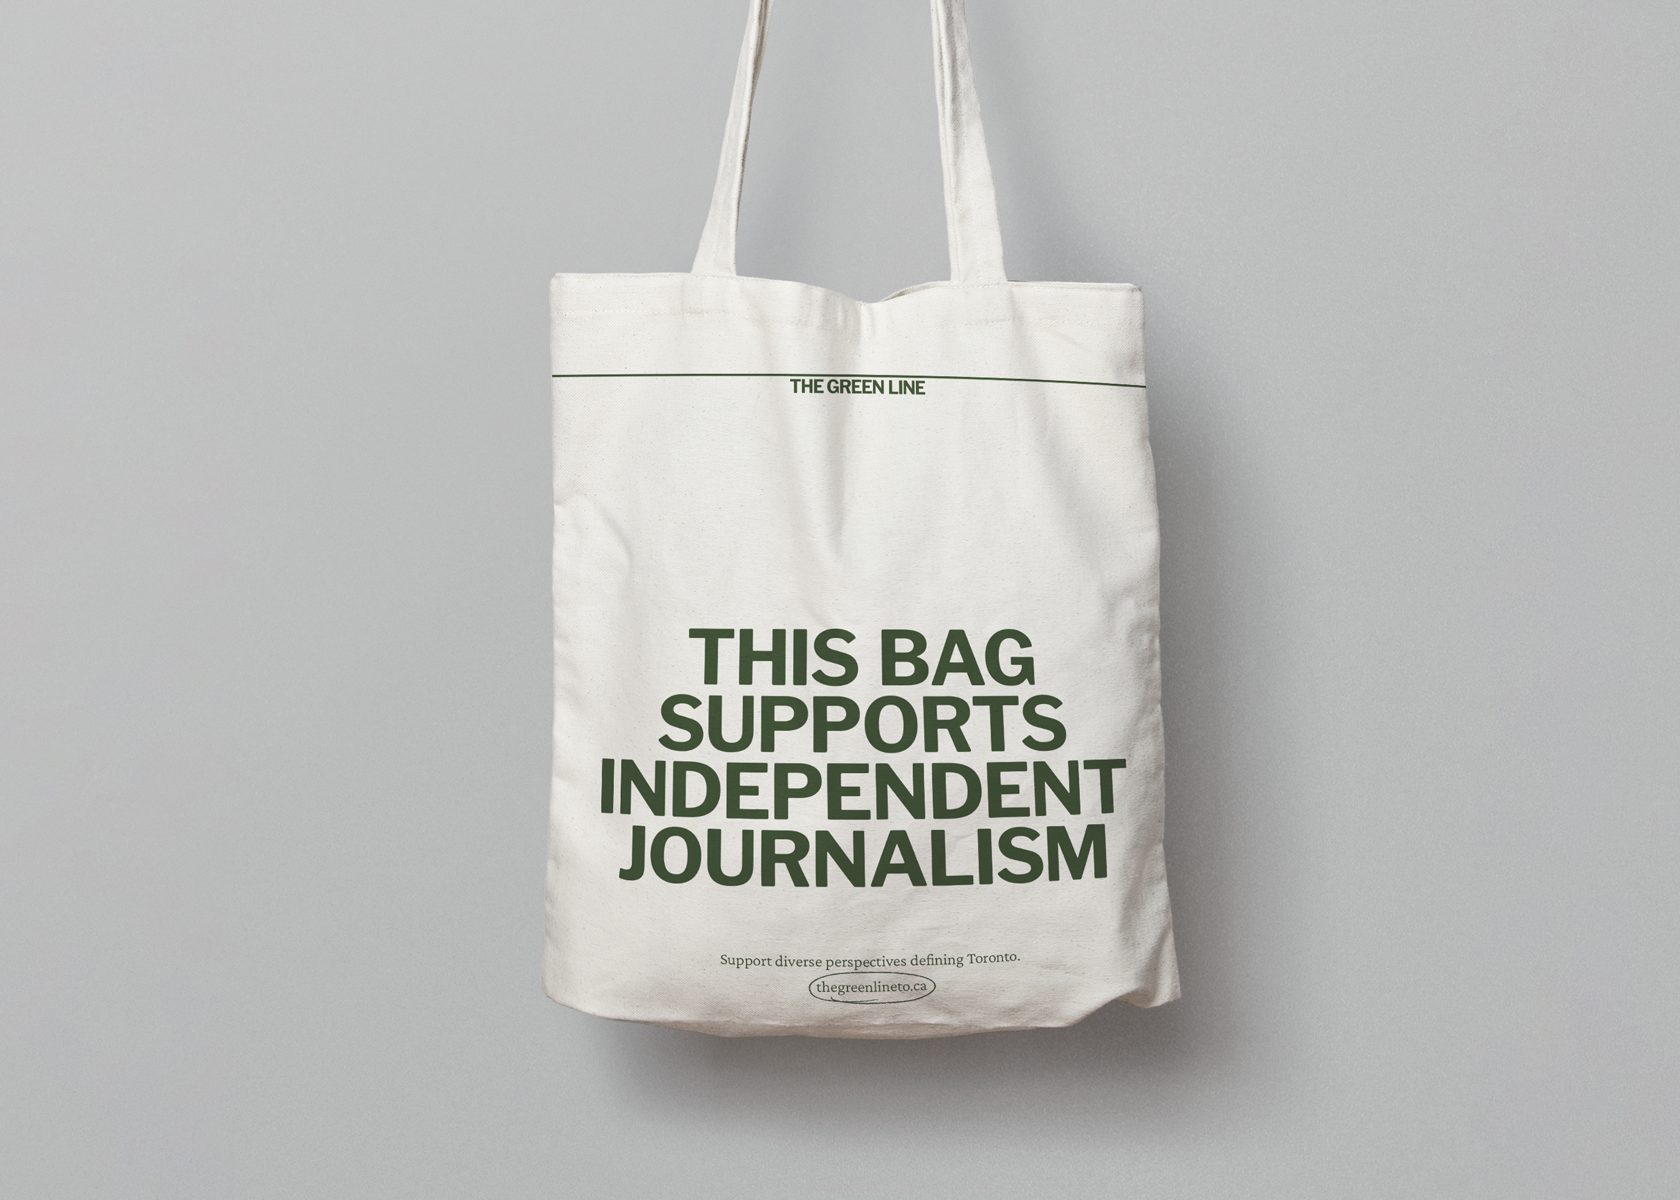 A branded tote bag